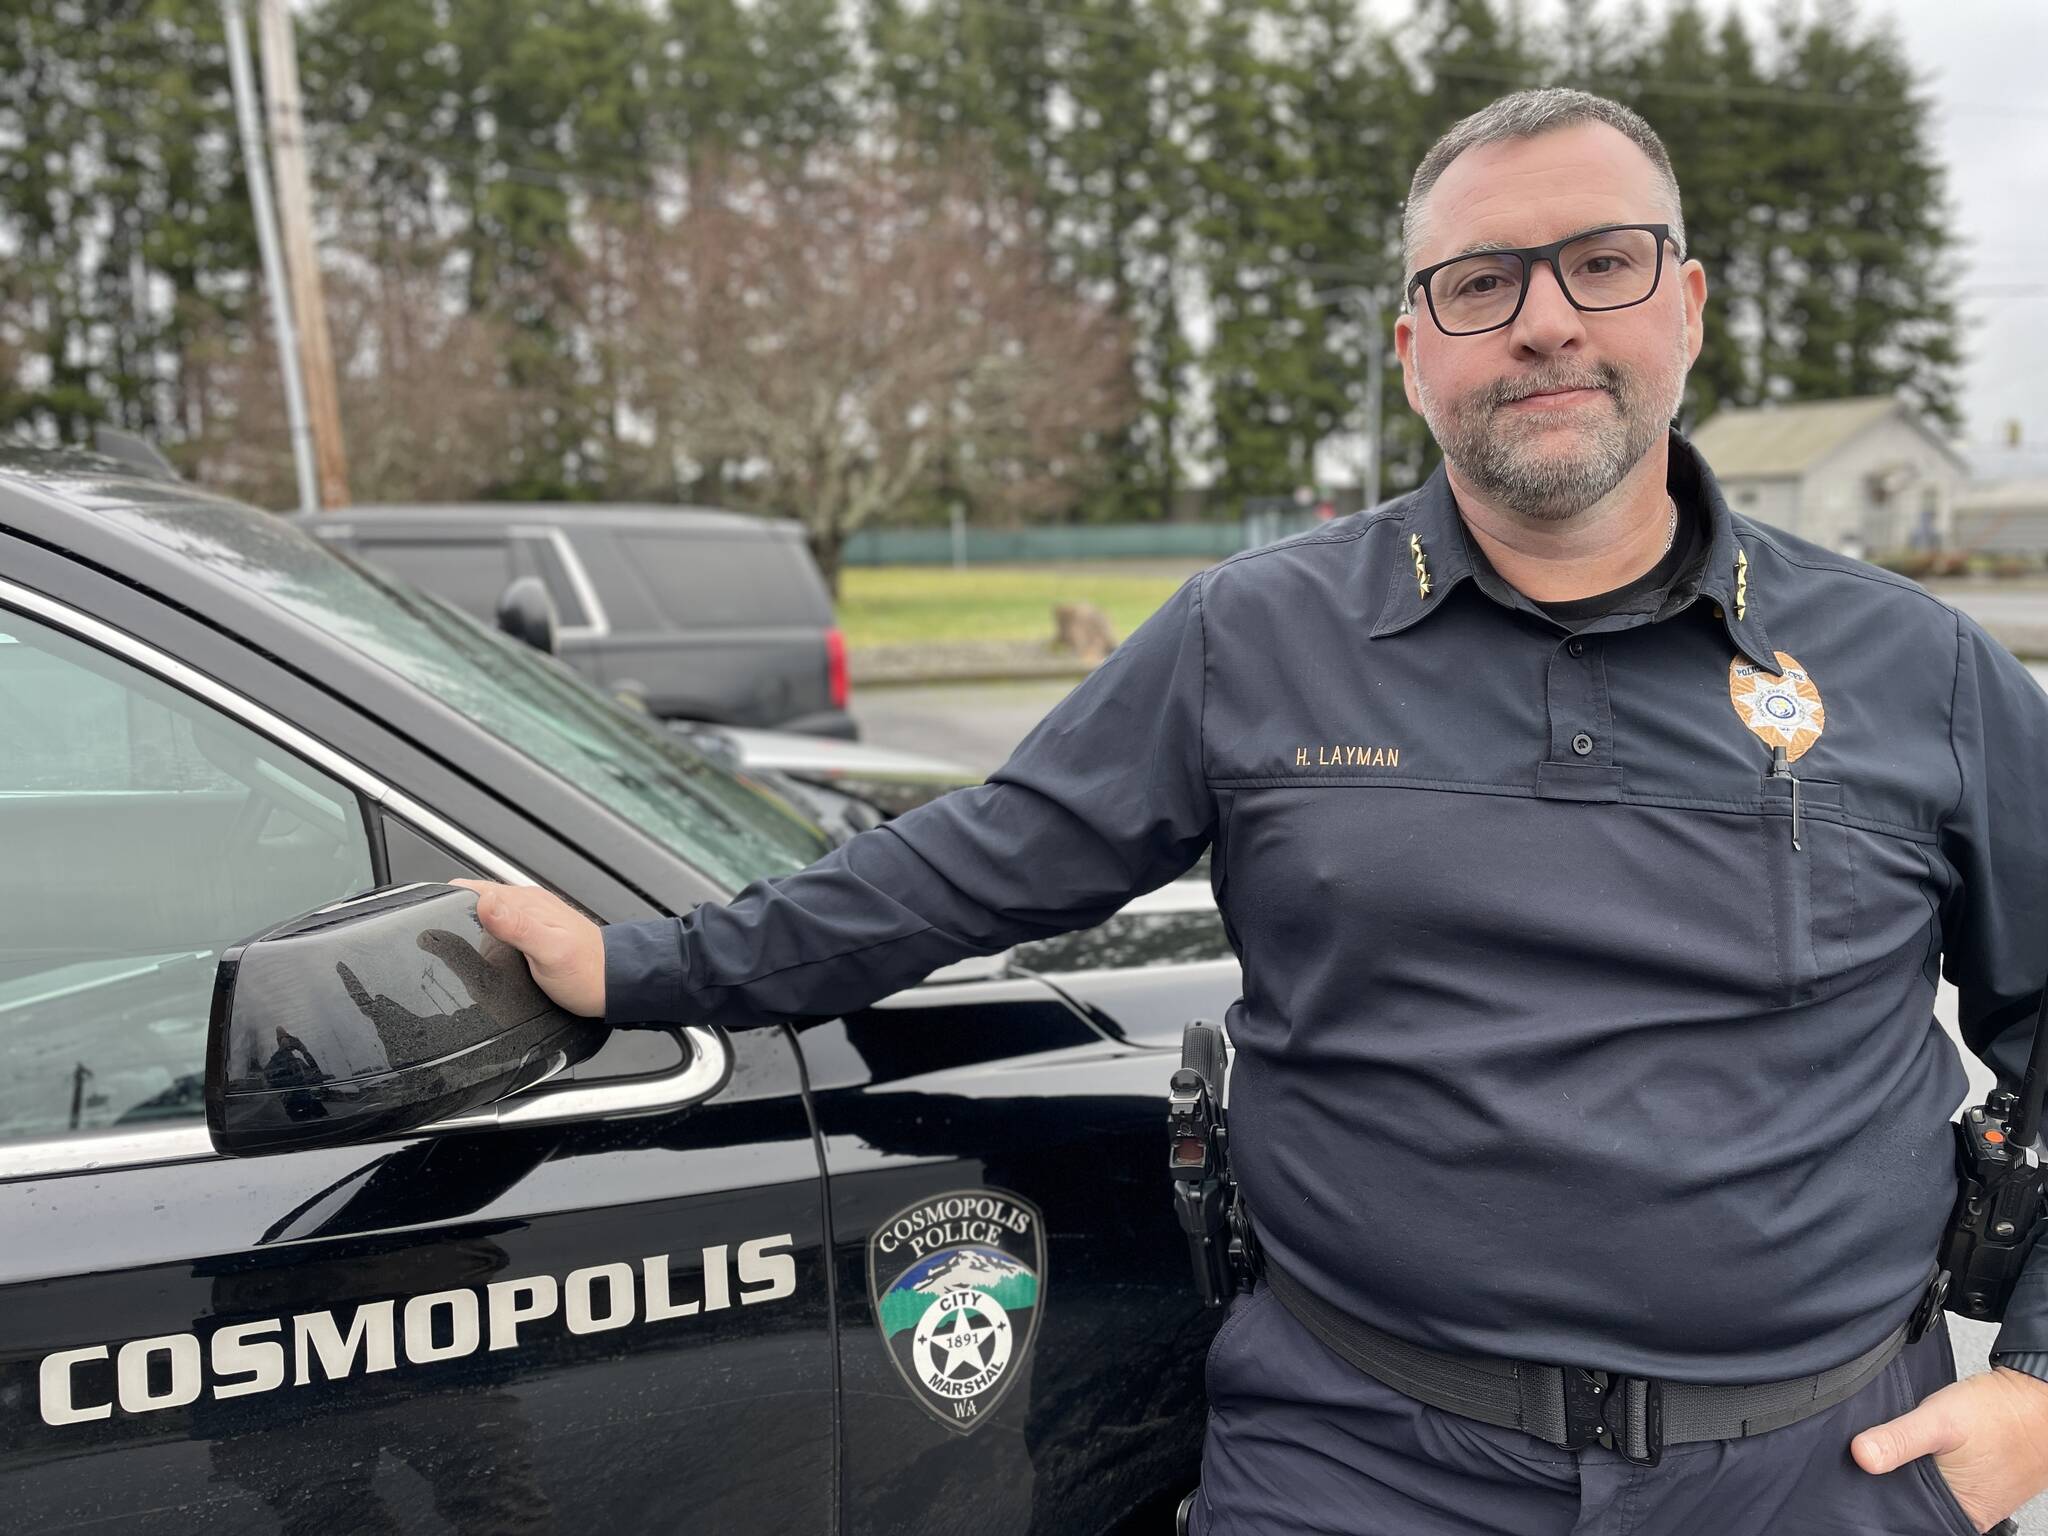 Heath Layman, with more than a quarter century of experience with the Cosmopolis Police Department, was officially confirmed as the chief of the department in January 2023. (Michael S. Lockett / The Daily World)